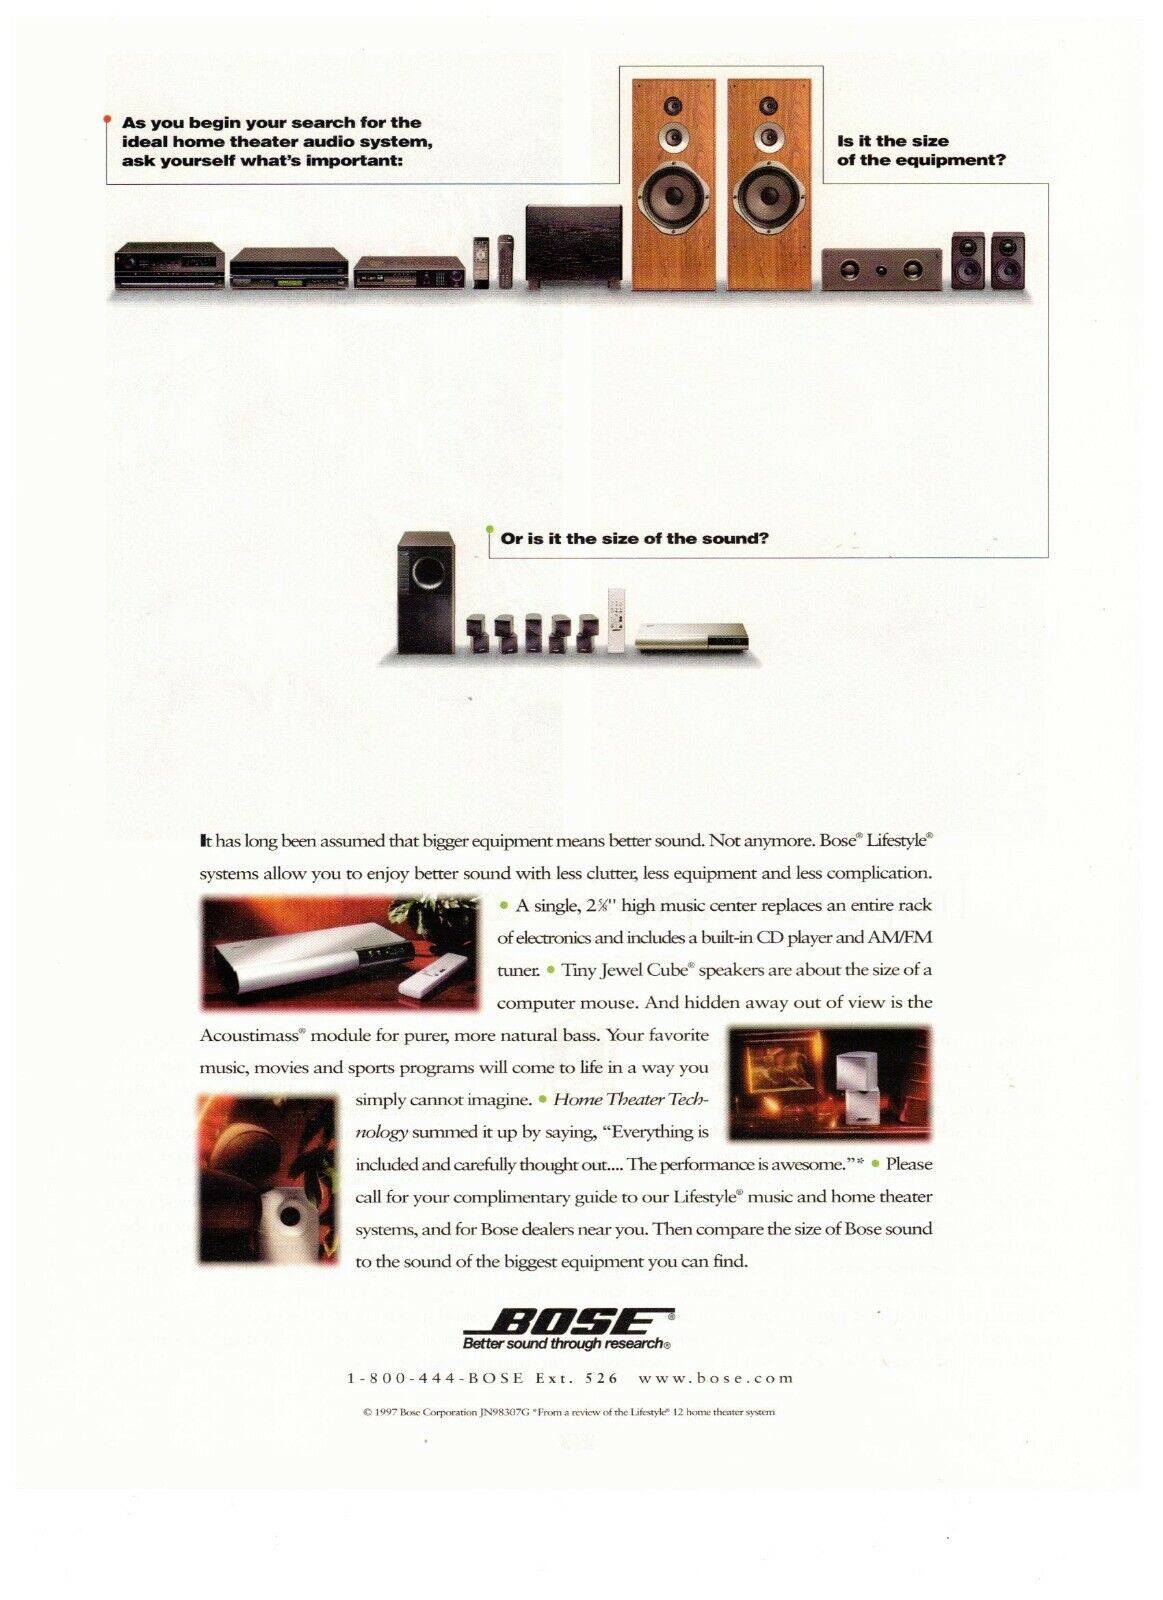 1997 Bose Stereo System Ideal Home Theater Vintage Print Advertisement